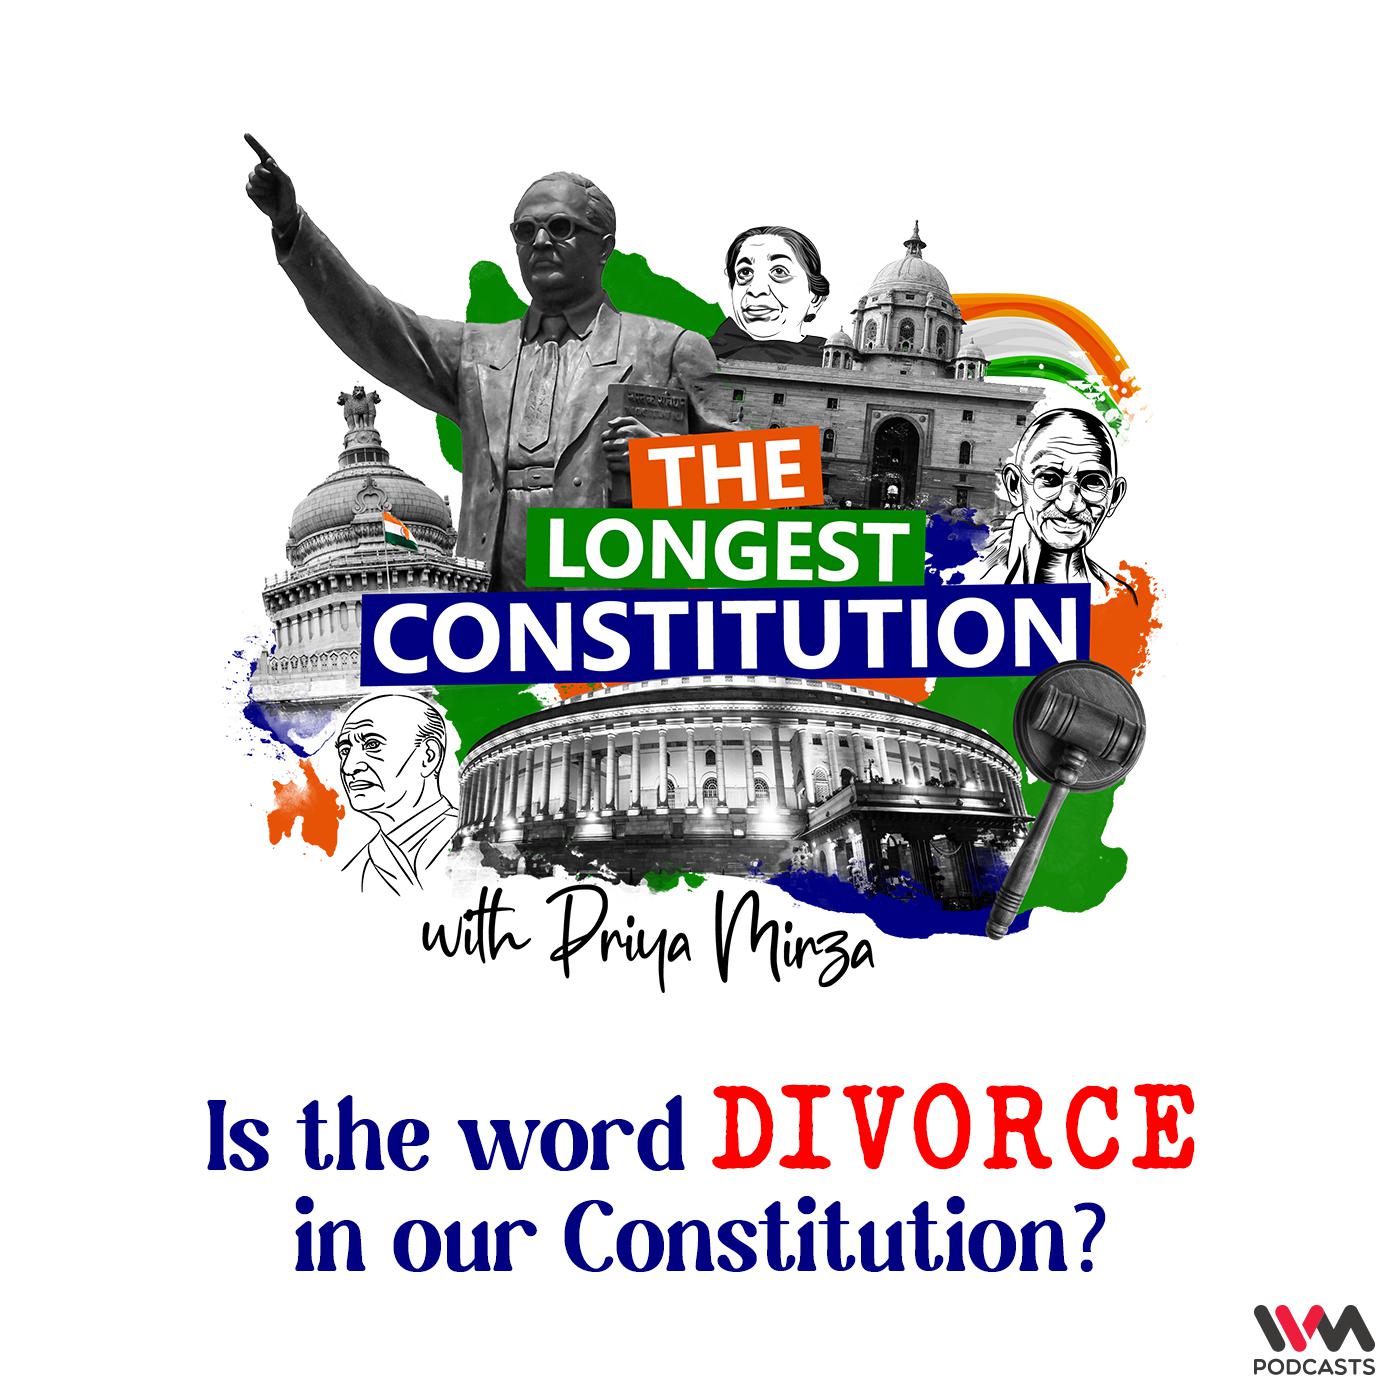 Is the word divorce in our Constitution?